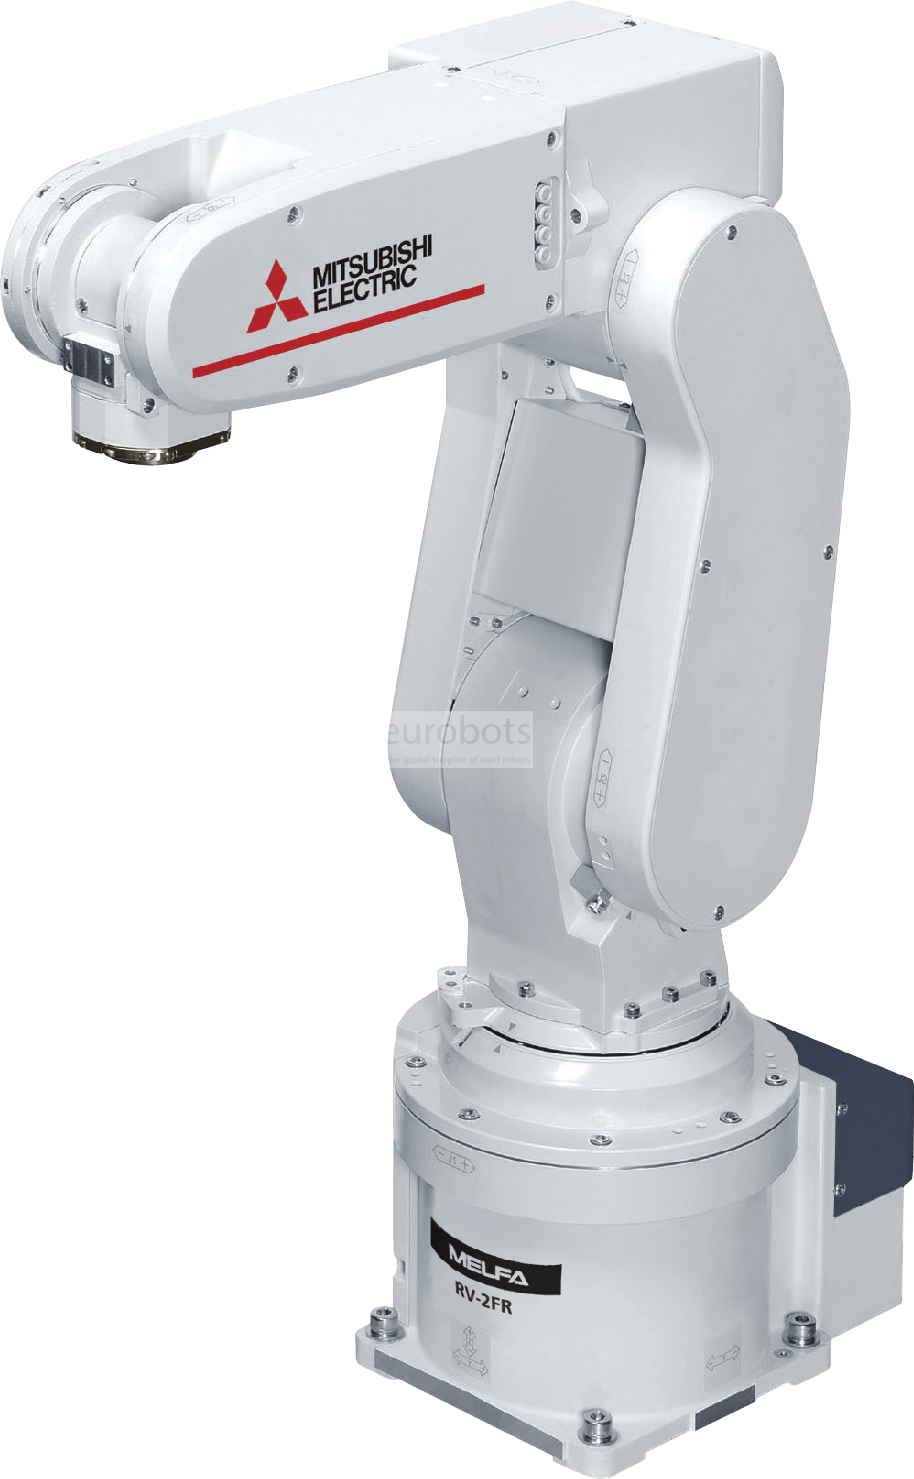 Used Industrial Robot Mitsubishi Melfa Rv-2Fr With Cr800-D/R Controller | Eurobots